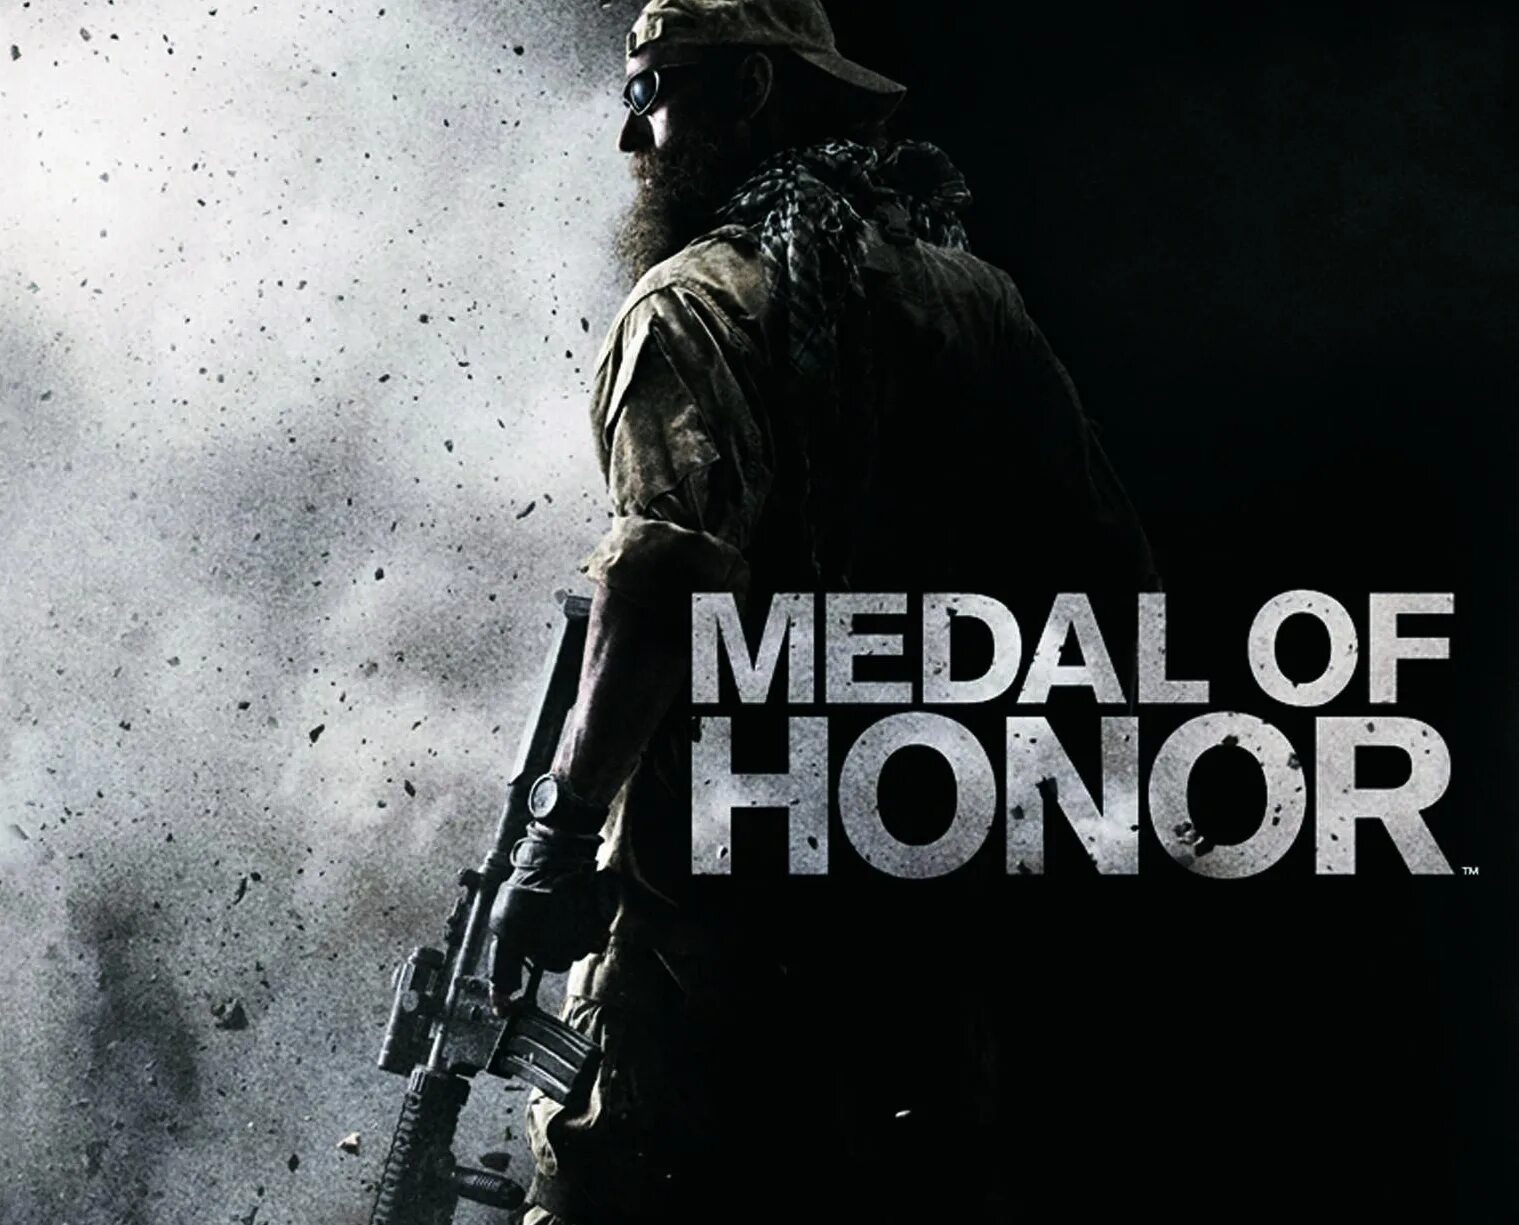 Medal of Honor Limited Edition 2010. Медаль оф хонор 2010. Medal of Honor Xbox 360. Medal of Honor 2010 обложка. Medal of honor 360